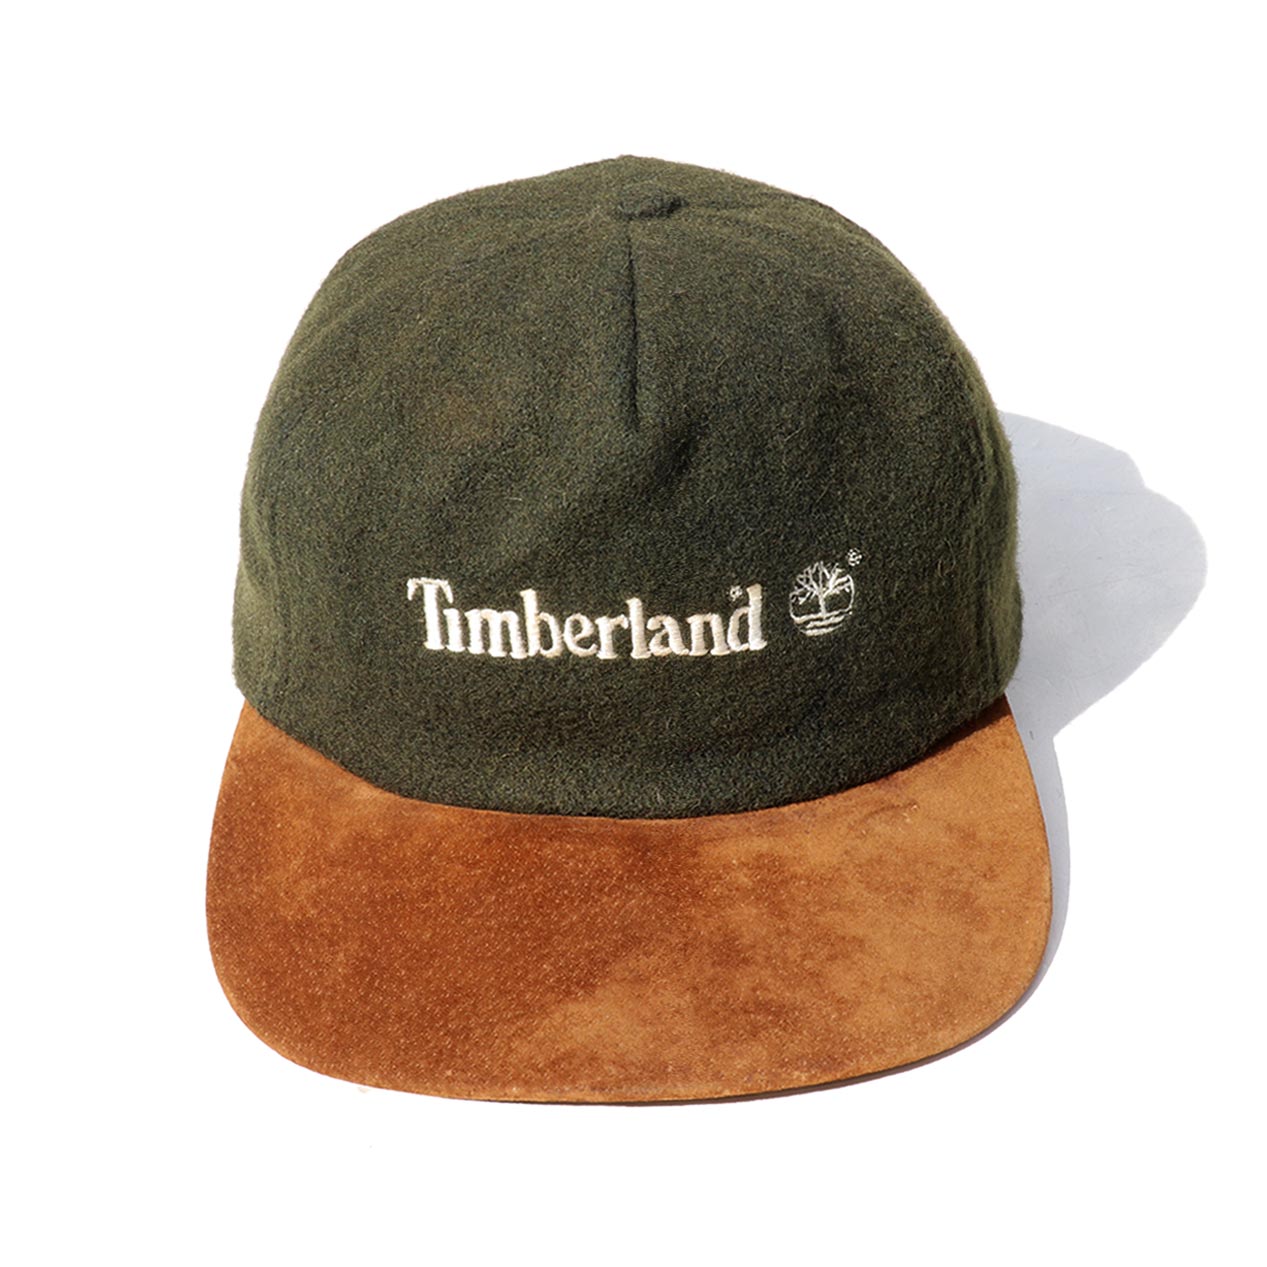 POST JUNK / 90's TIMBERLAND Wool / Suede Leather Strapback Cap [FREE]